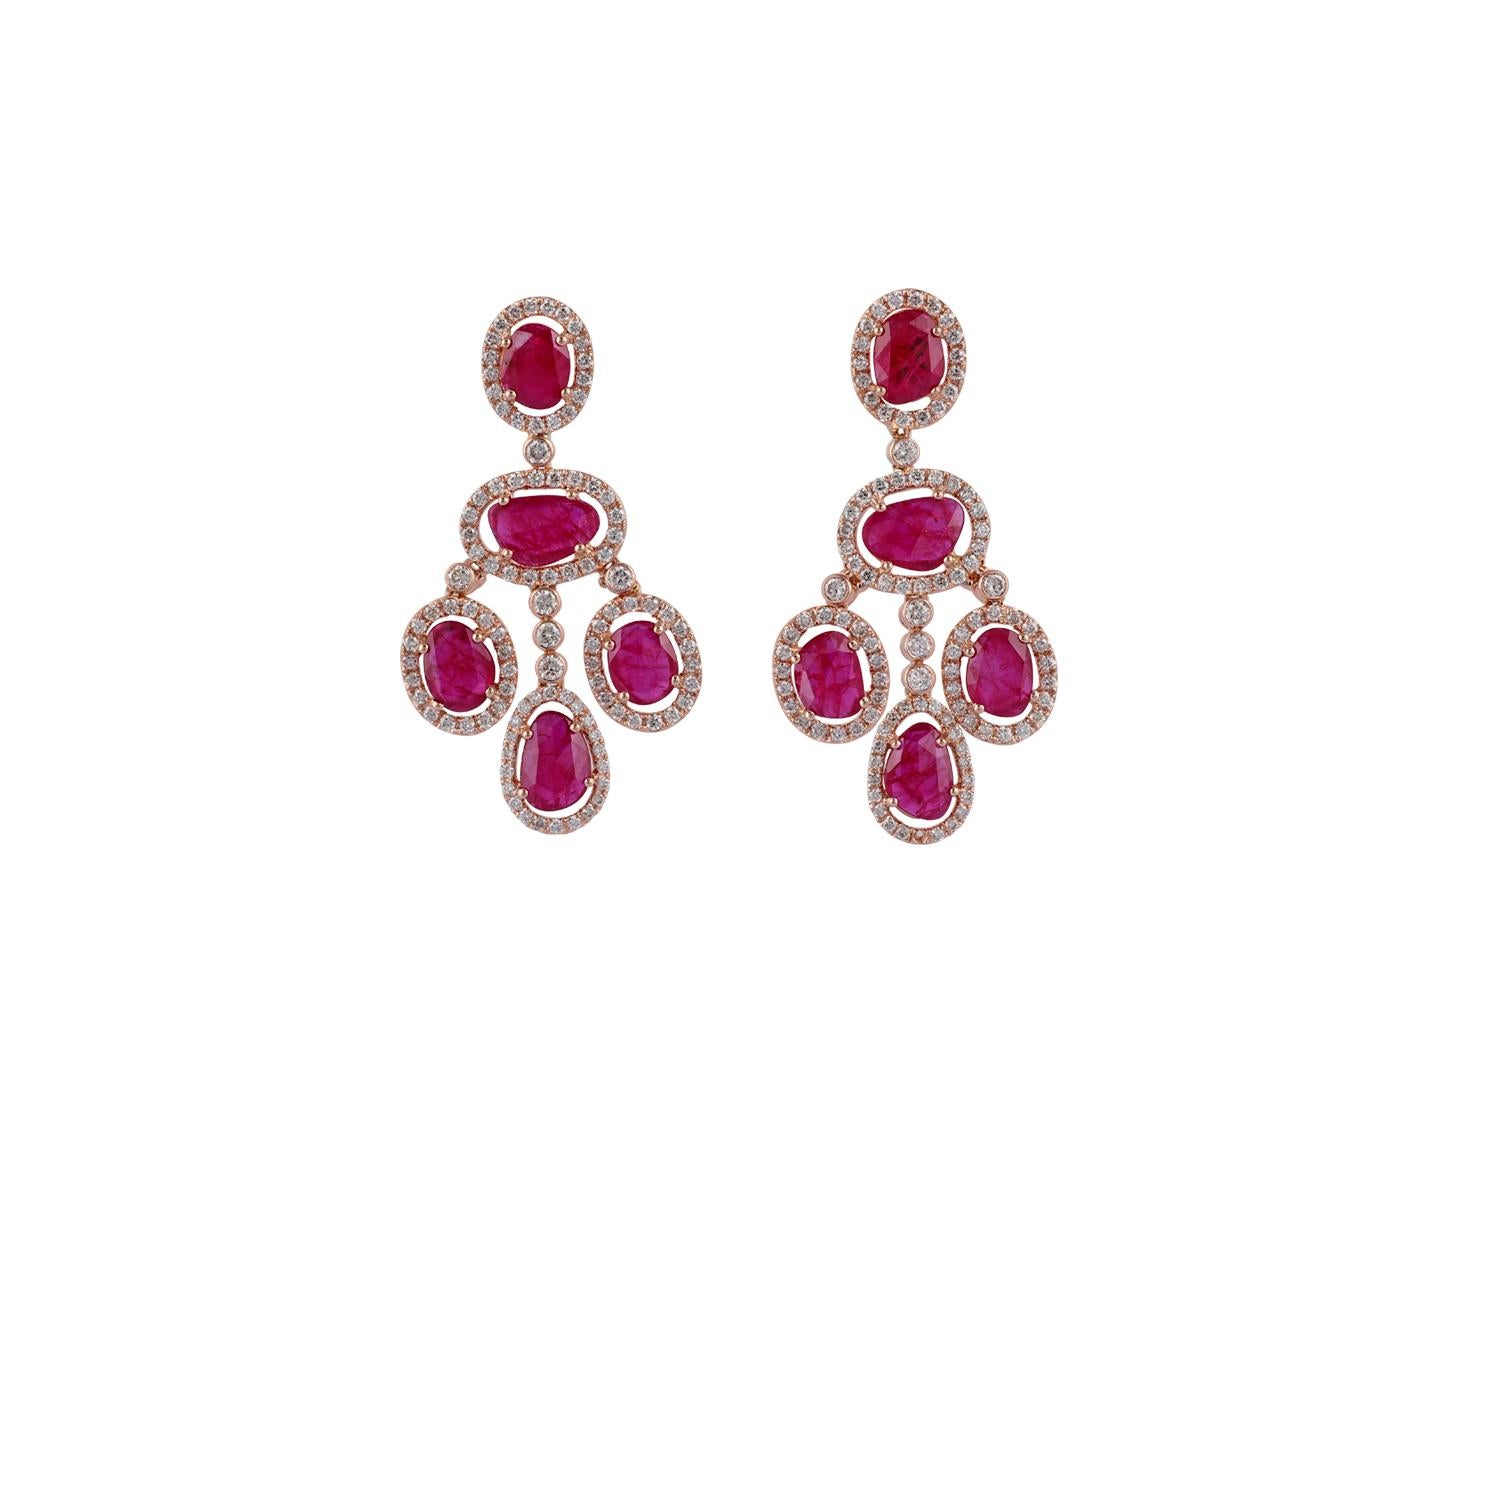 These are an exclusive earrings with ruby & diamonds features 10 pieces of rose cut rubies weight 6.42 carats, surrounded with 208 pieces of round brilliant cut of diamonds weight 1.77 carats, these entire earrings are studded in 18k rose gold